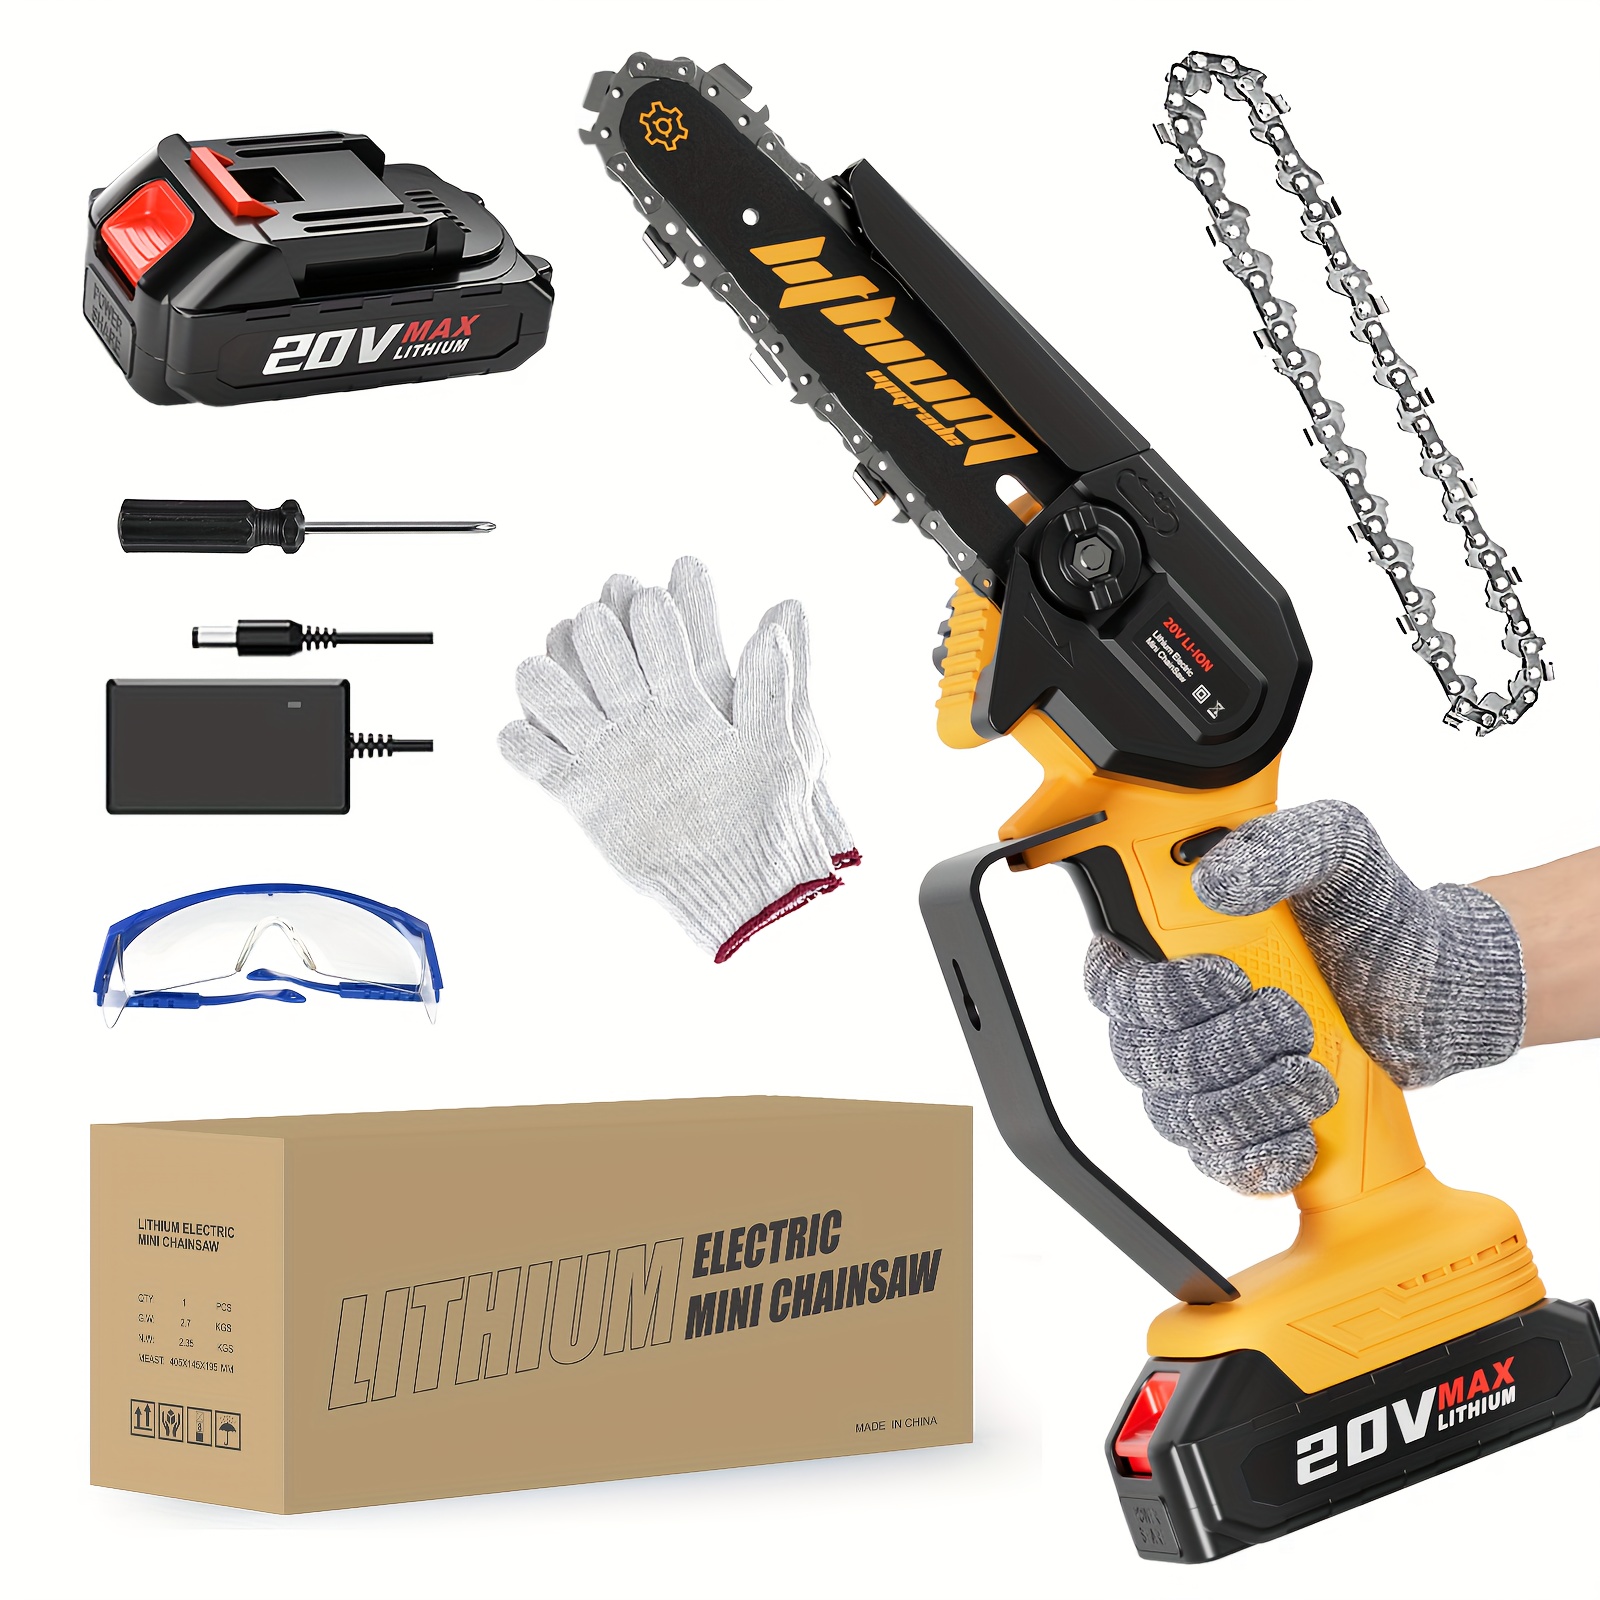 

6-inch Cordless Mini Chainsaw: High-performance Handheld Electric Saw For Precise Tree Trimming And Wood Cutting, Equipped With Dual Batteries And A Robust Manganese Steel Chain